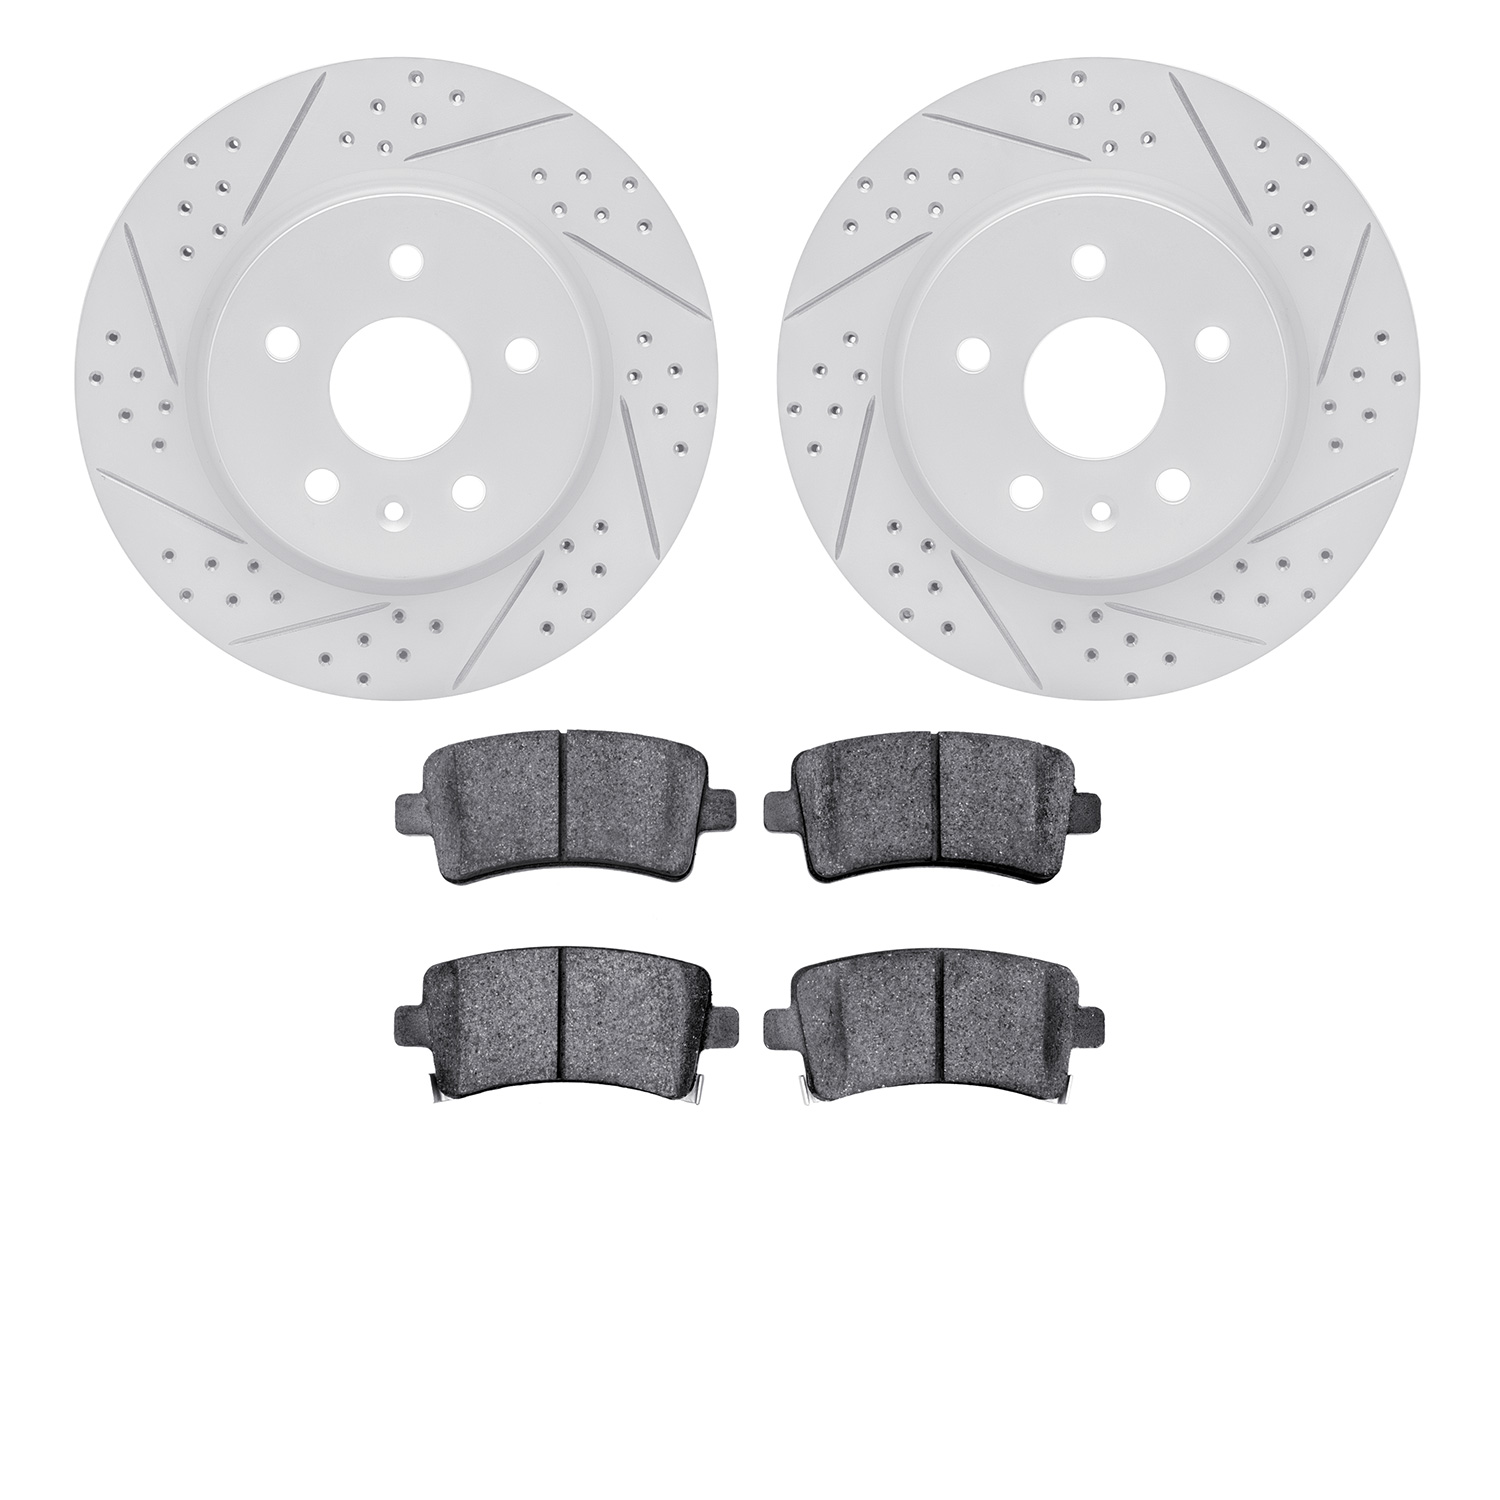 2602-65031 Geoperformance Drilled/Slotted Rotors w/5000 Euro Ceramic Brake Pads Kit, 2010-2020 GM, Position: Rear